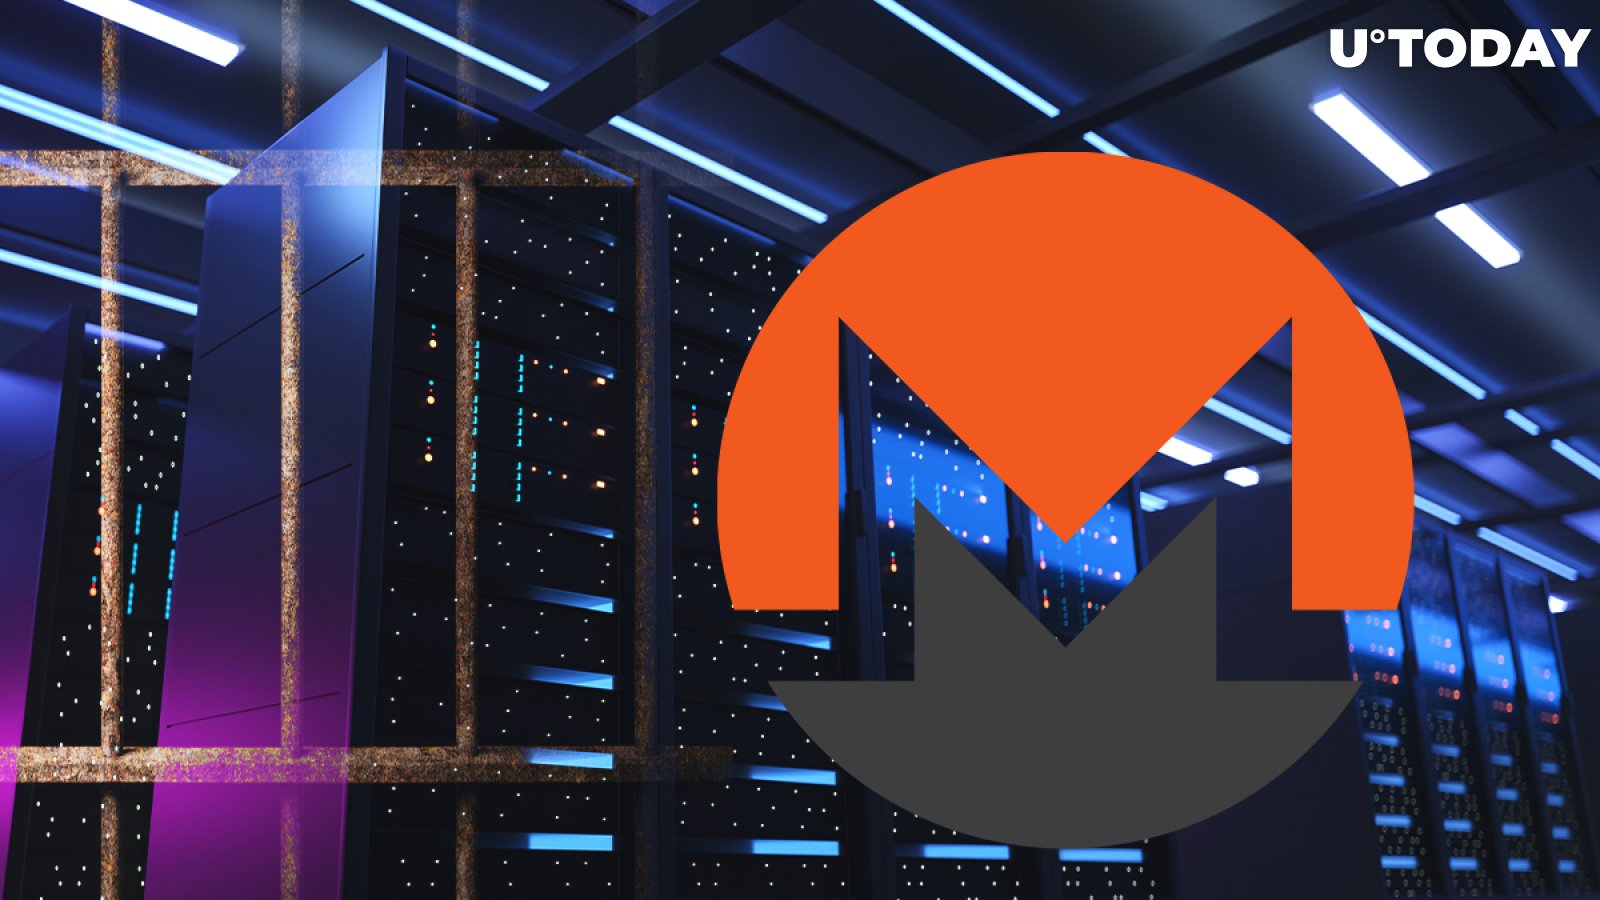 Here's What Happened to Australian Who Was Mining Monero on Government's Supercomputers